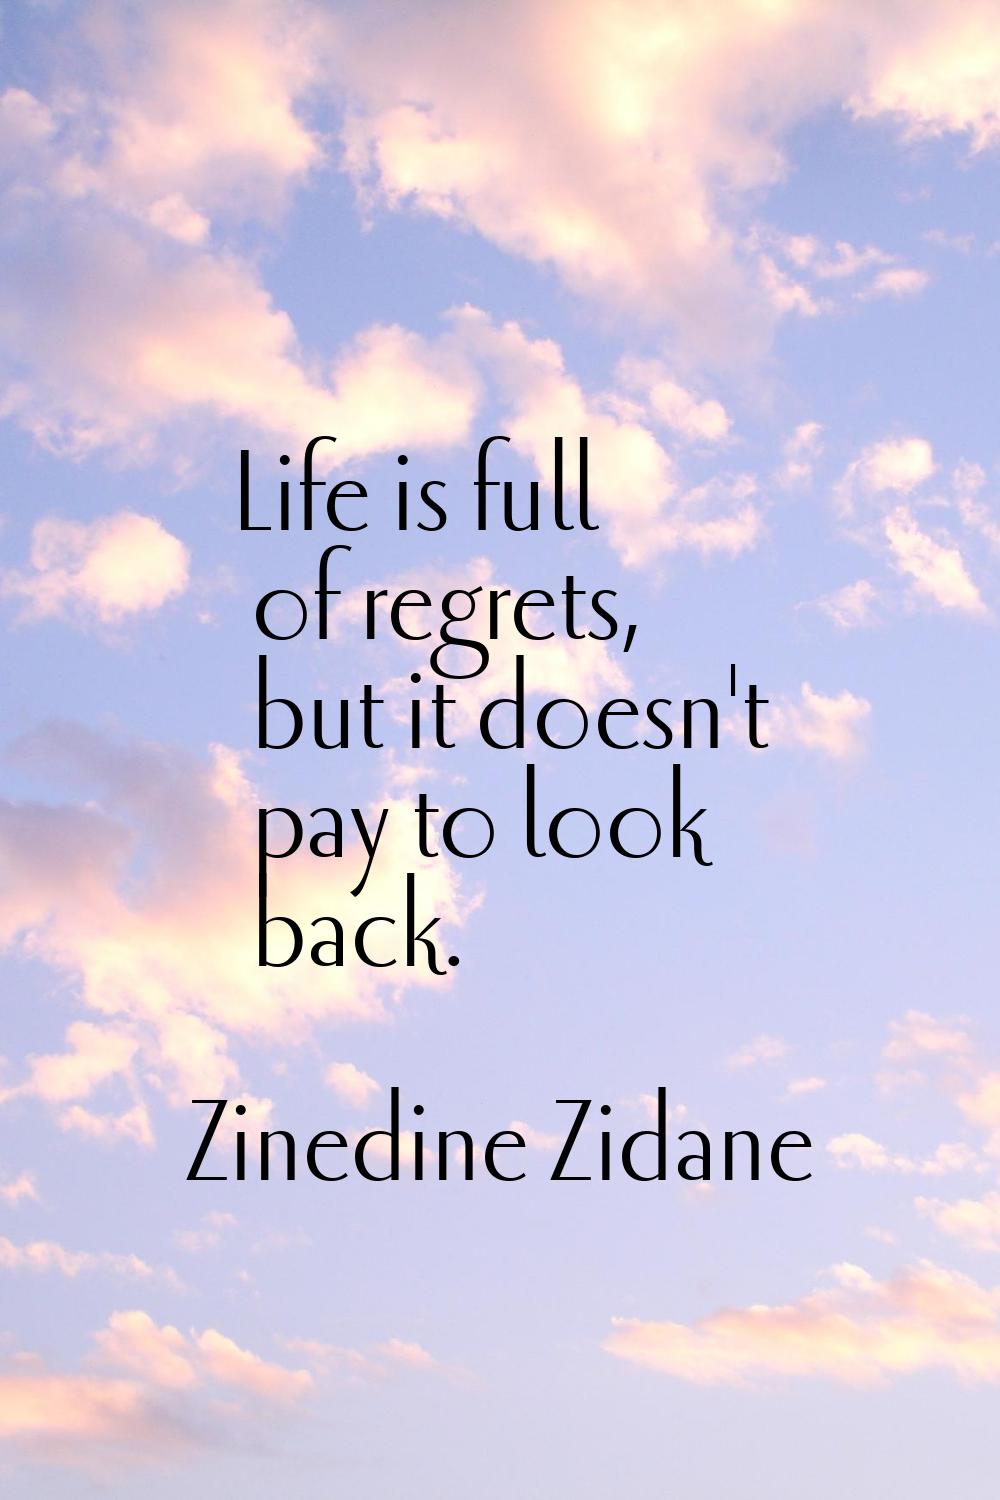 Life is full of regrets, but it doesn't pay to look back.